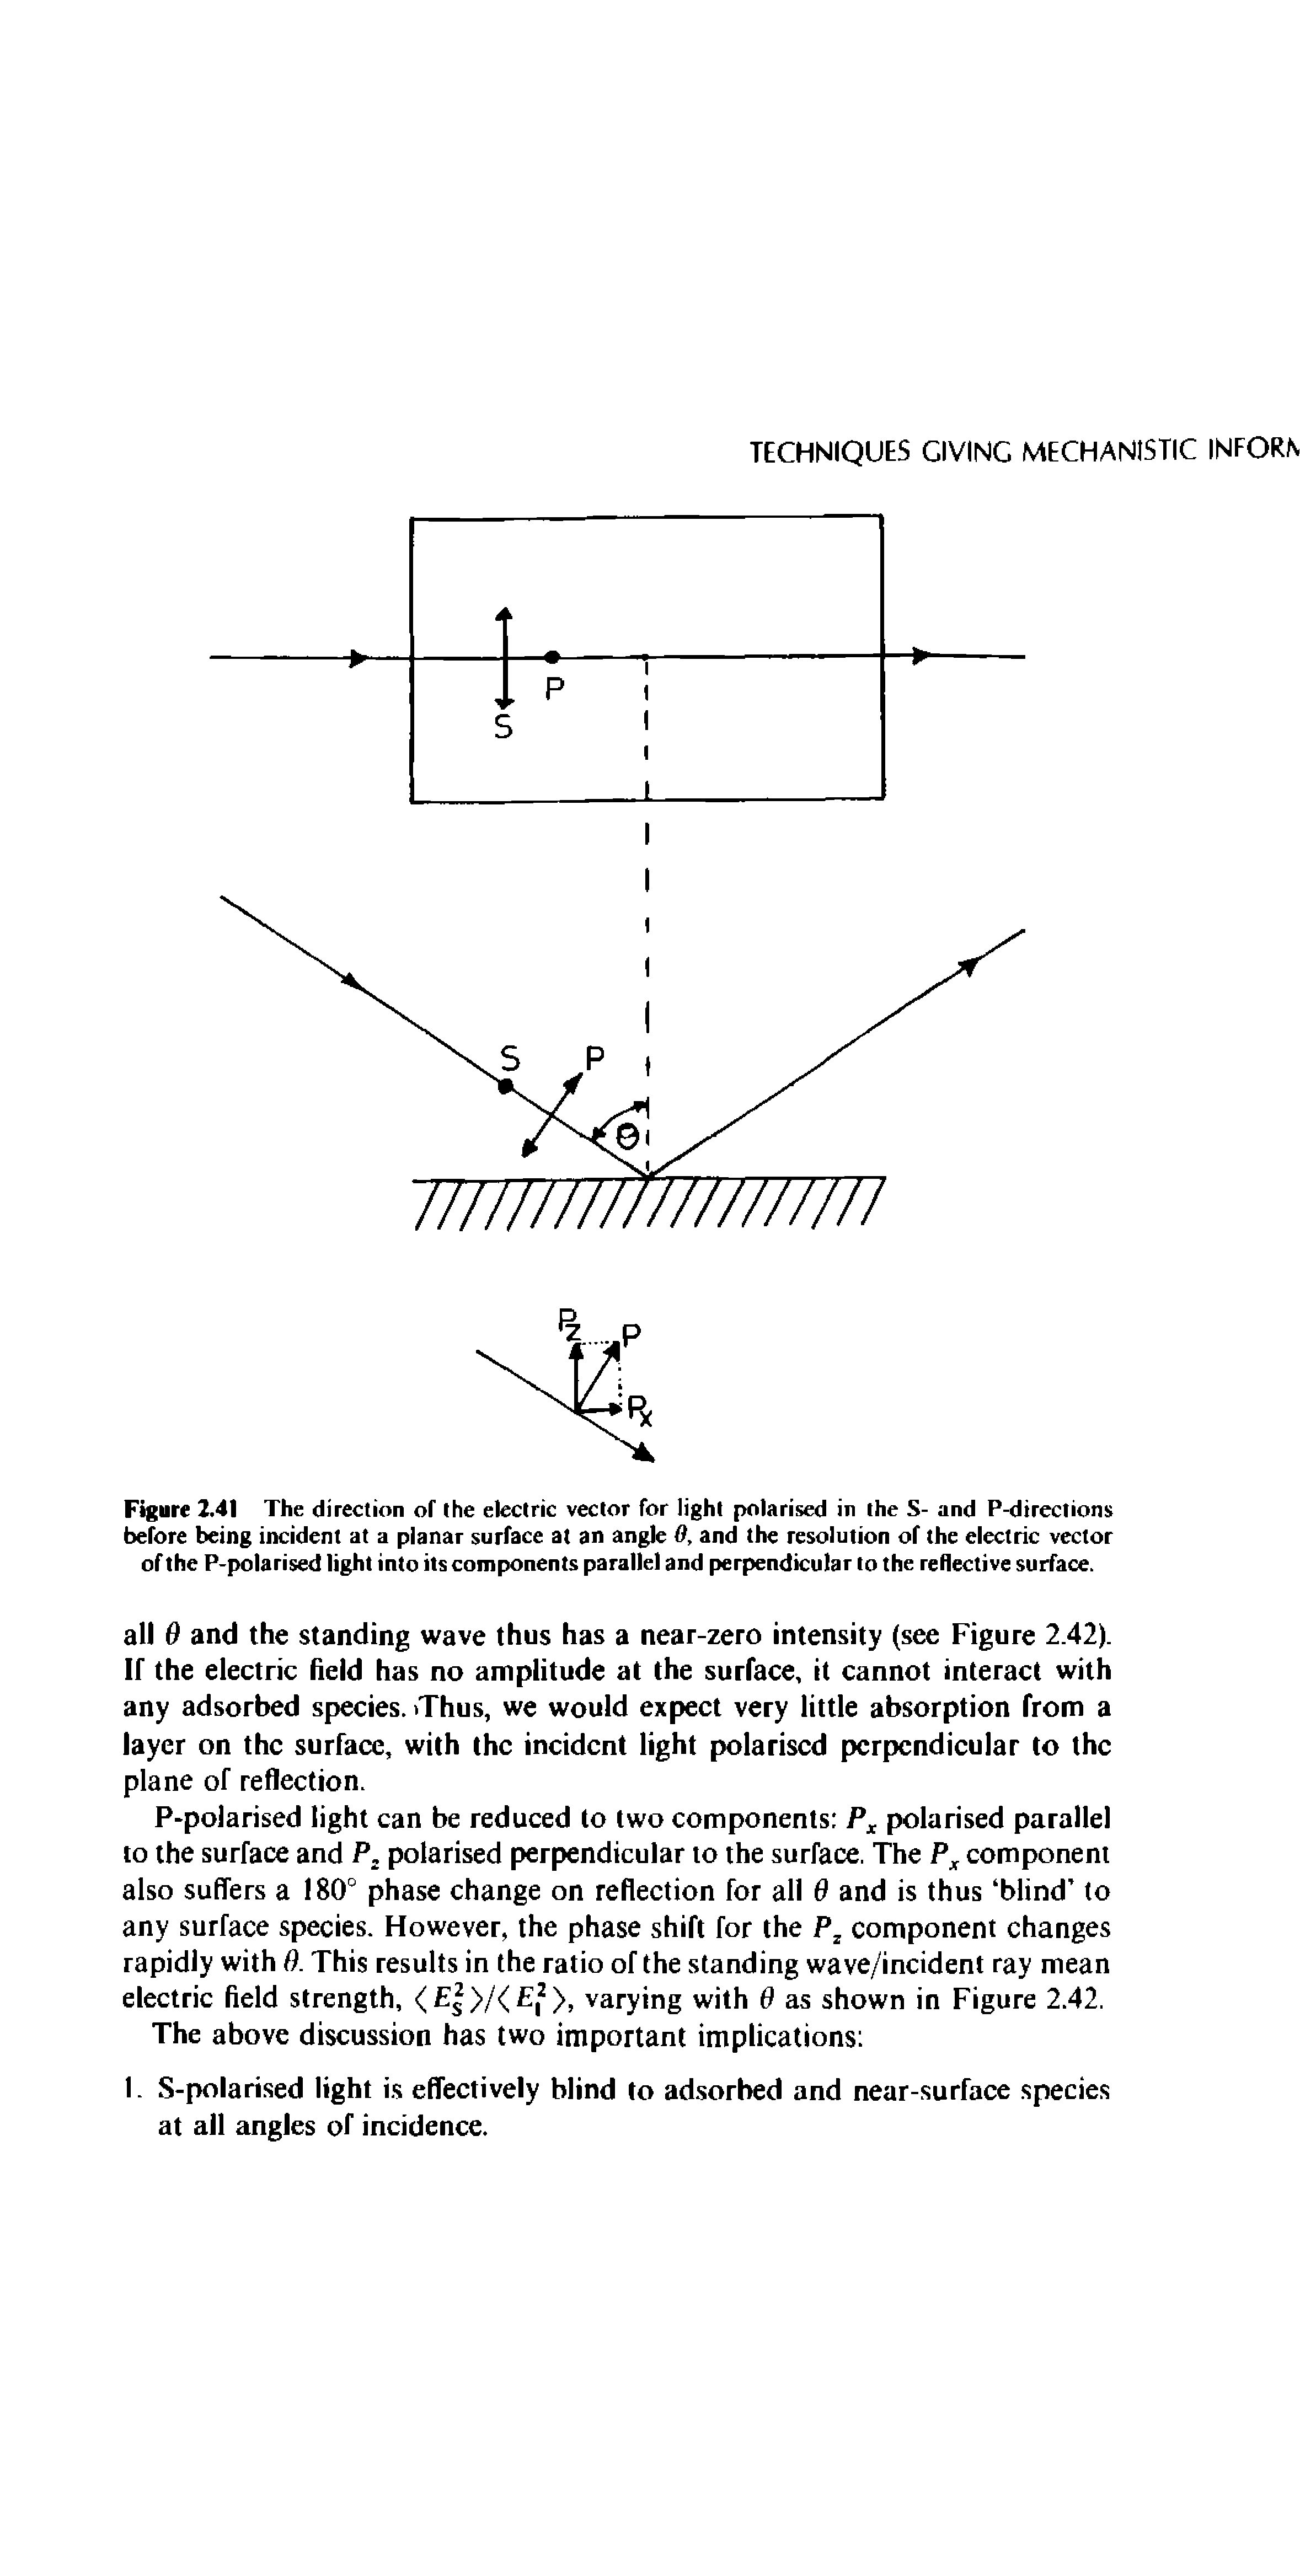 Figure 2.41 The direction of the electric vector for light polarised in the S- and P-directions before being incident at a planar surface at an angle 6, and the resolution of the electric vector of the P-polarised light into its components parallel and perpendicular to the reflective surface.